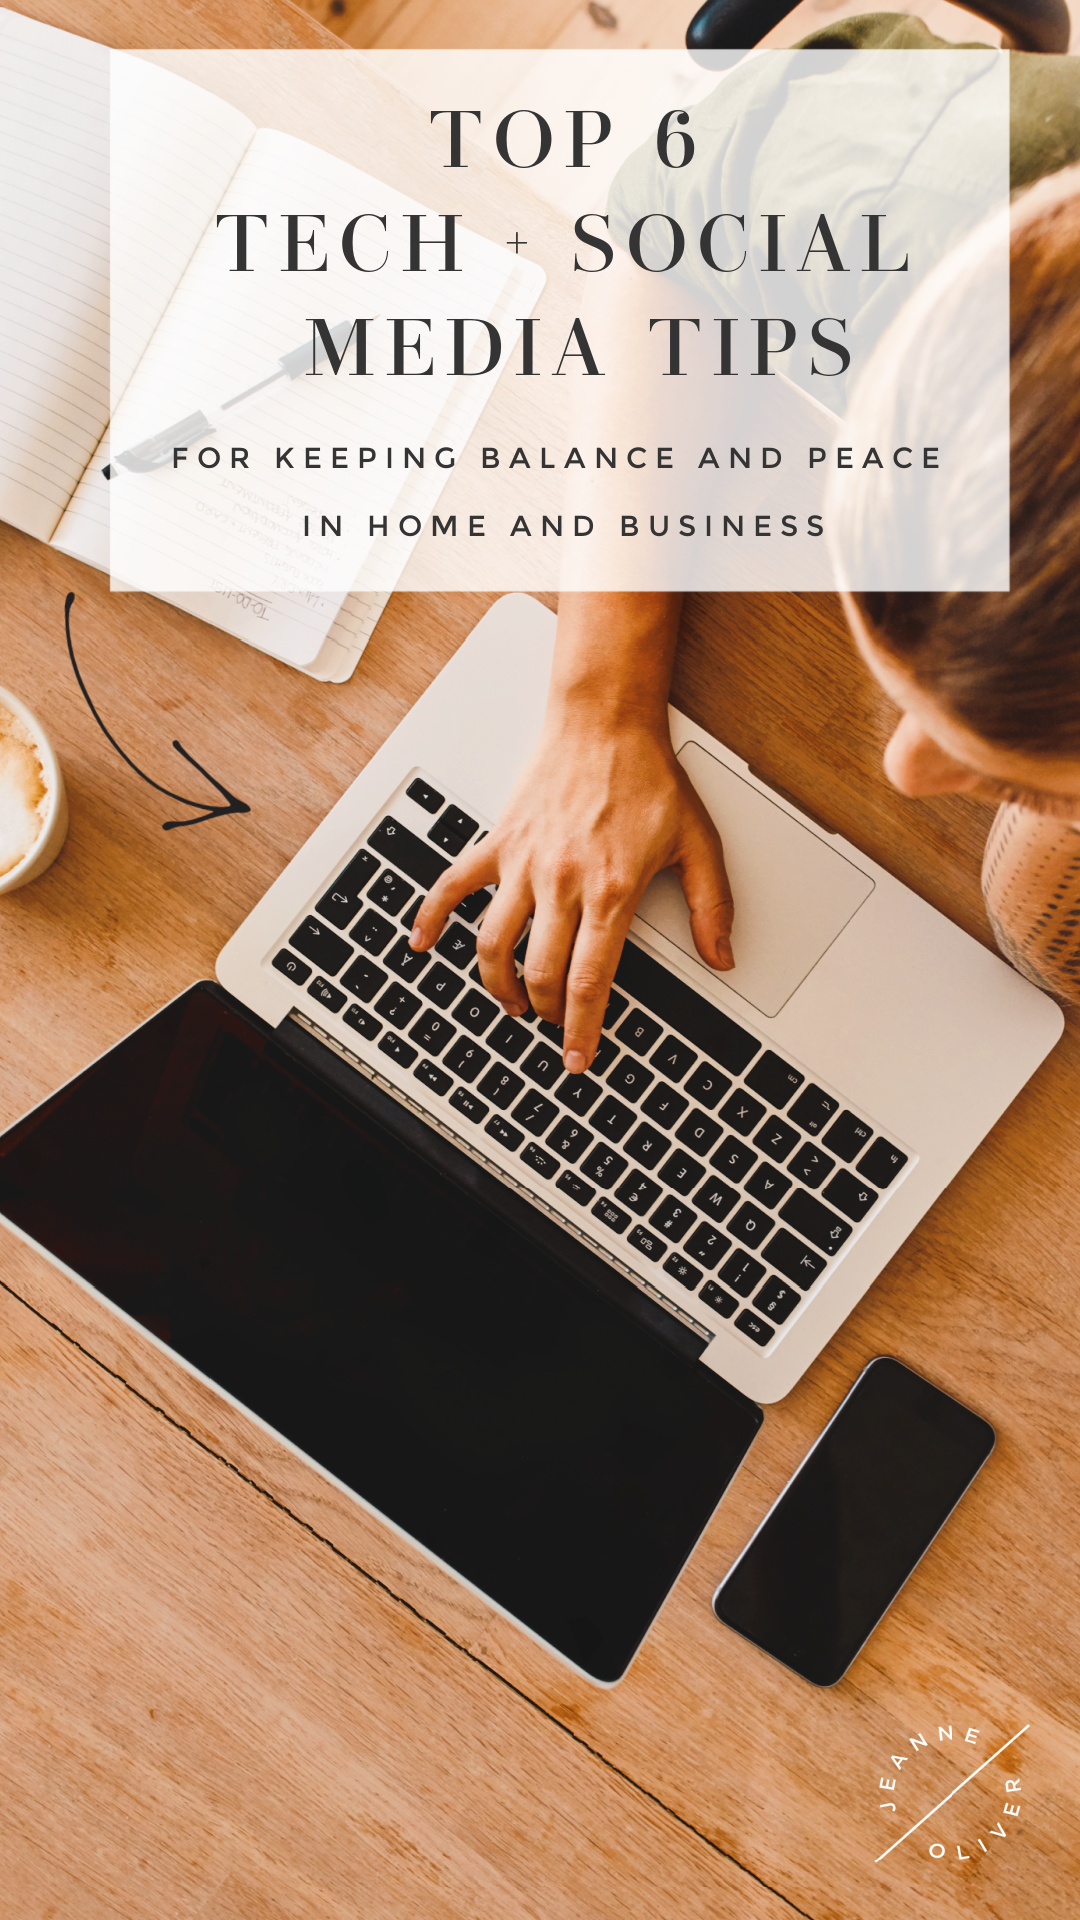 Top 6 Technology and Social Media Tips | For Creating Balance in Home and Business